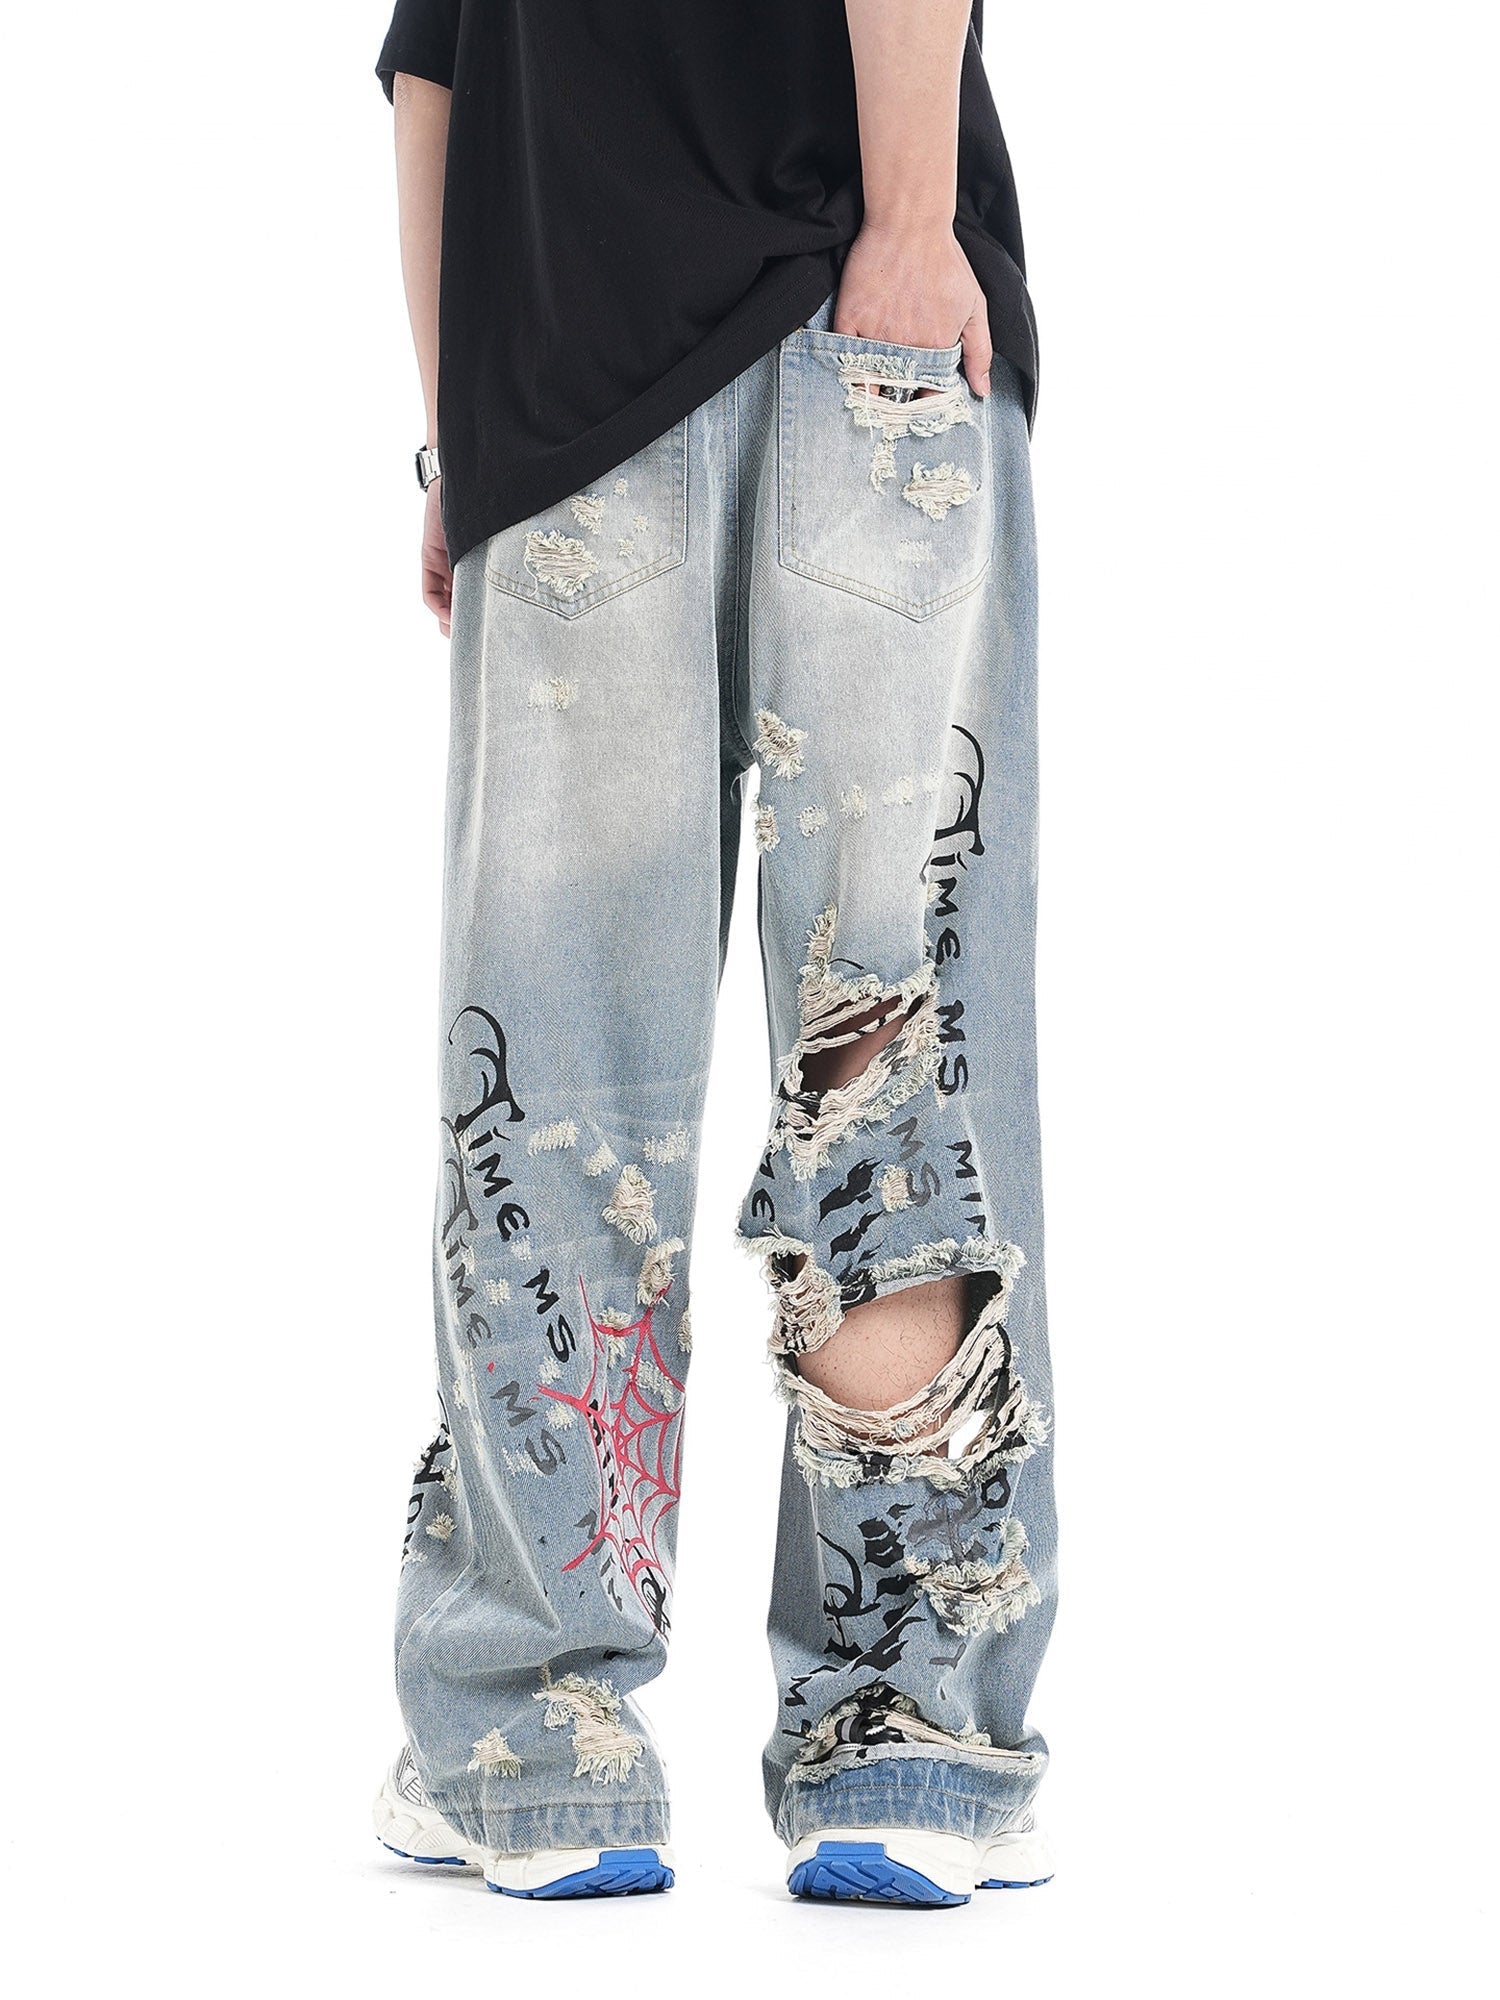 Beautiful And Trendy Personalized Cut Hand-printed Jeans